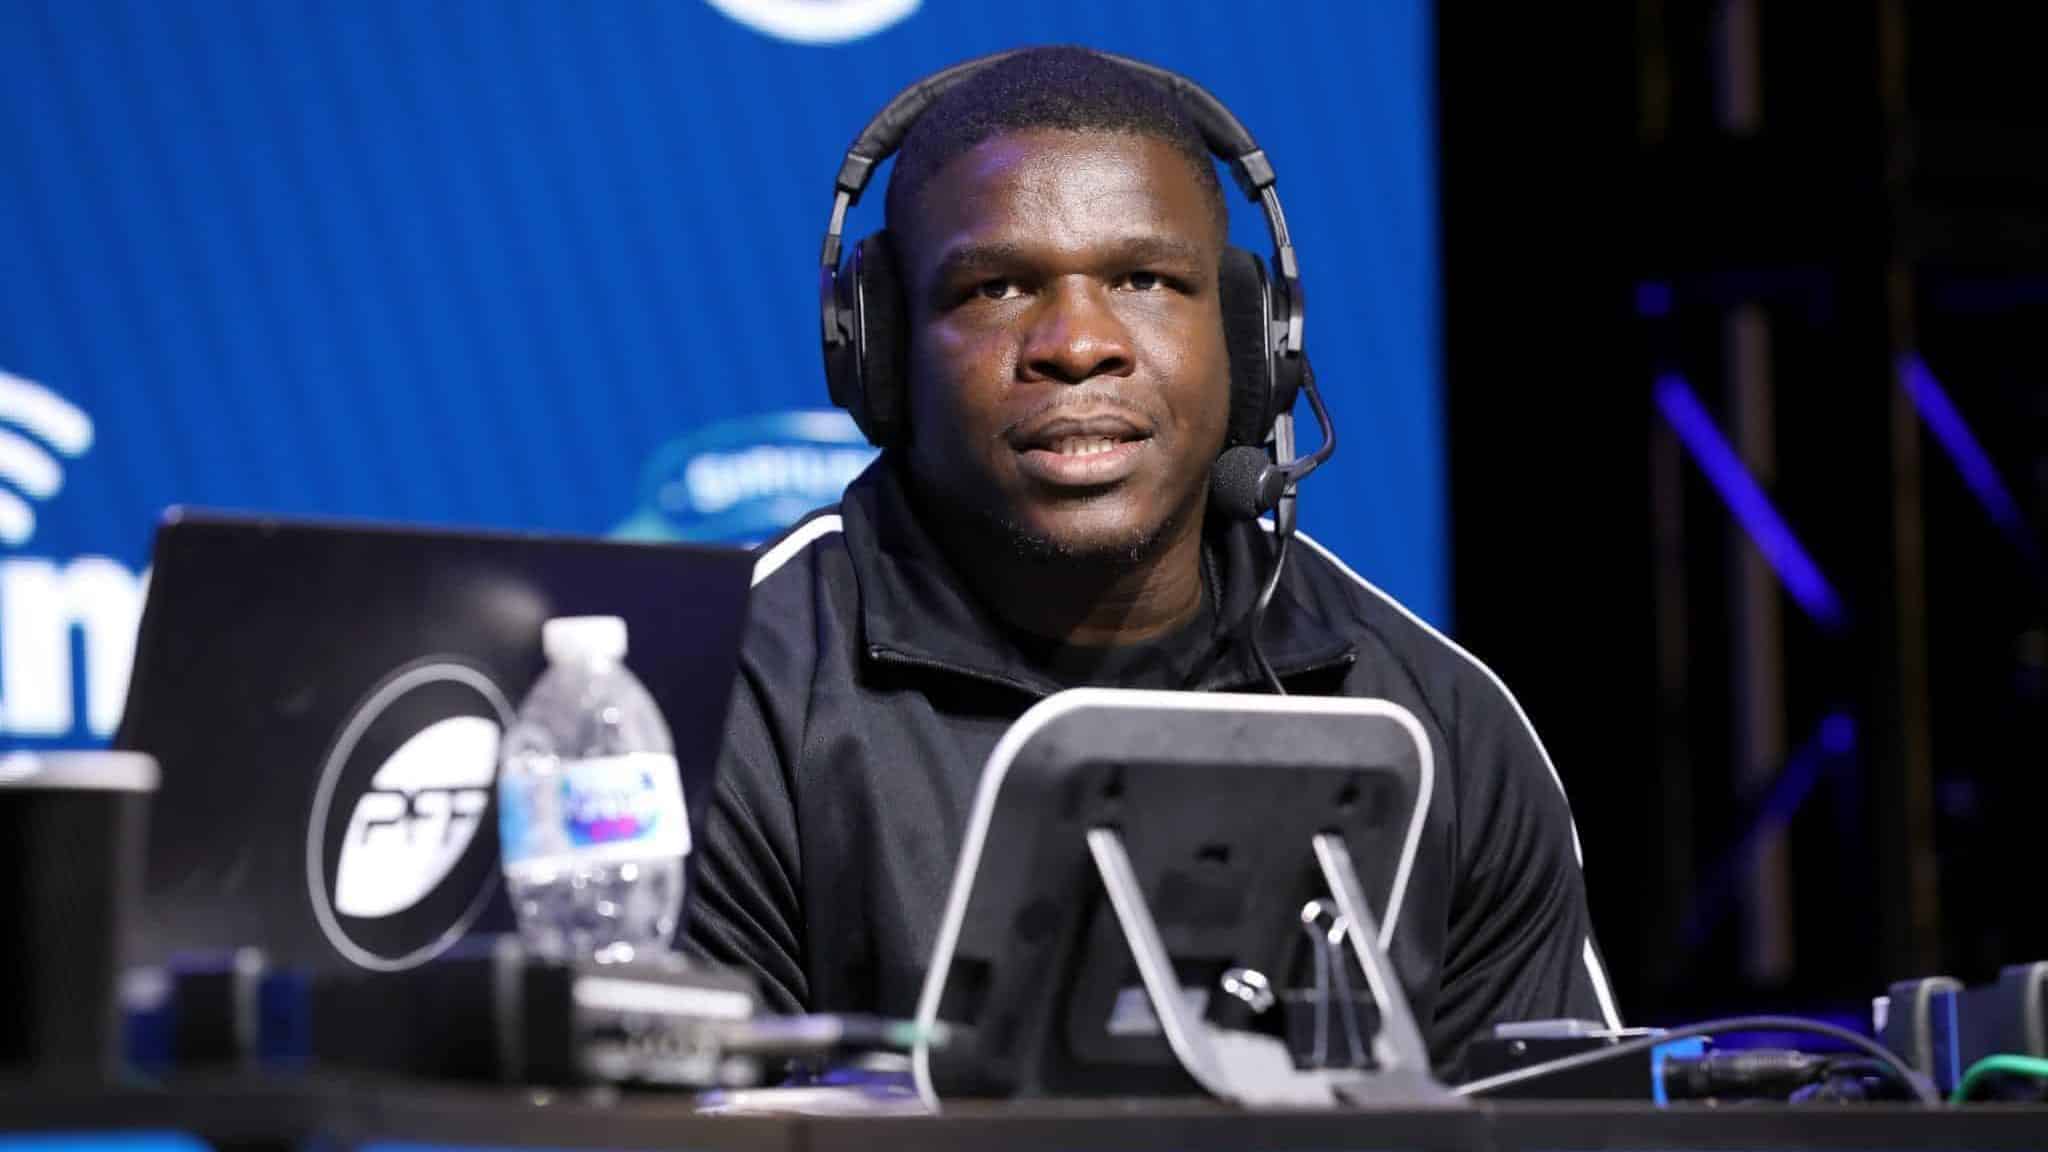 MIAMI, FLORIDA - JANUARY 30: NFL running back Frank Gore of the Buffalo Bills speaks onstage during day 2 of SiriusXM at Super Bowl LIV on January 30, 2020 in Miami, Florida. New York Jets